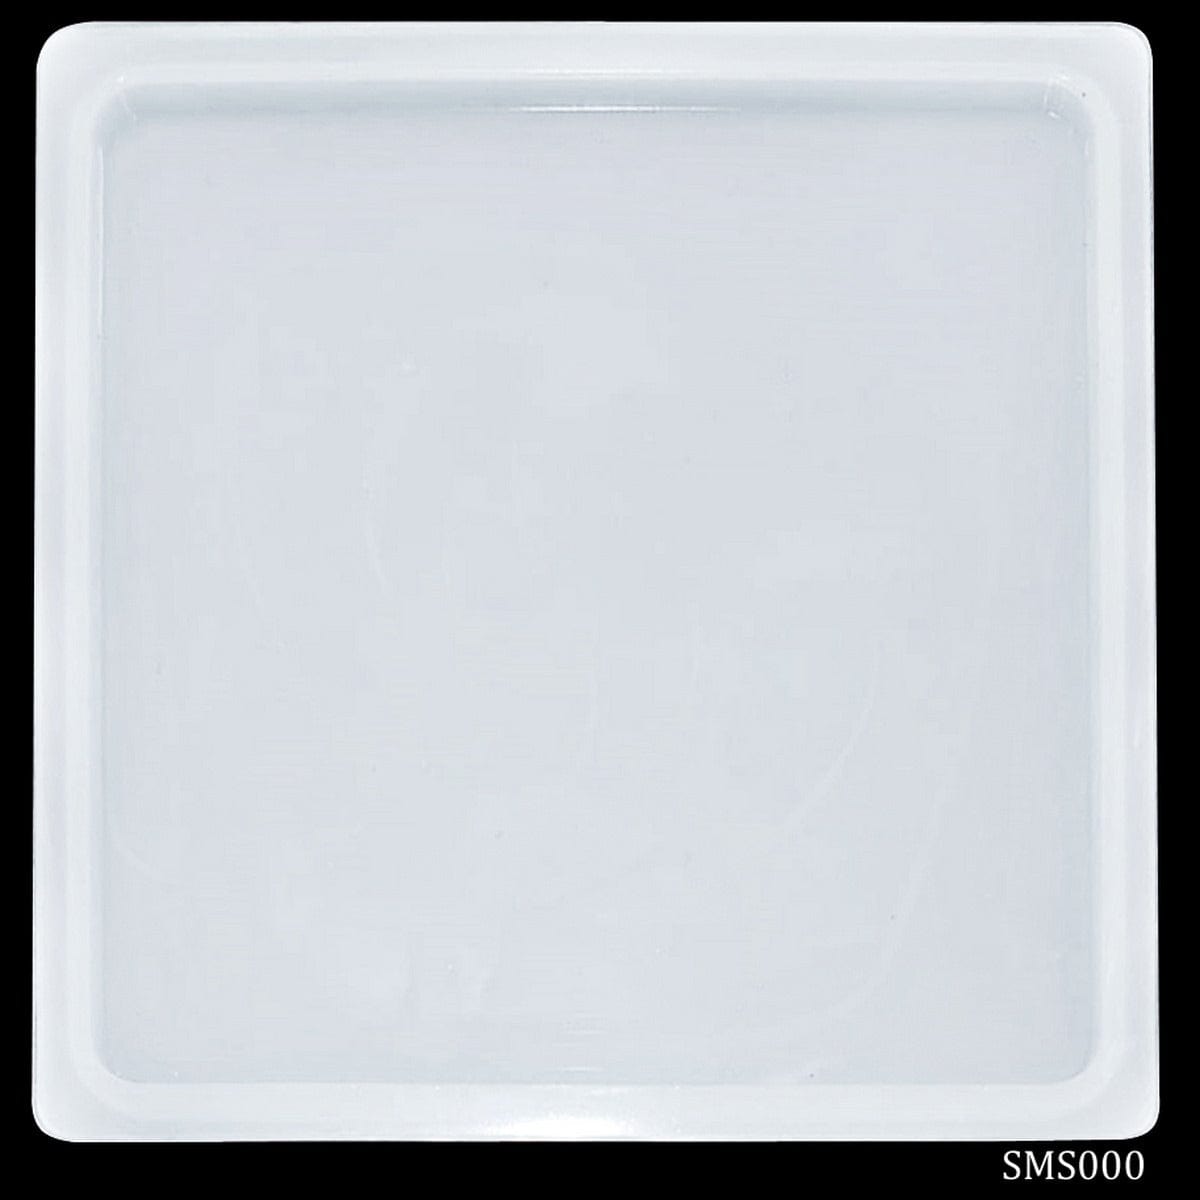 jags-mumbai Mould Silicone Mould Square 4.2 X 4.2Inc SMS000